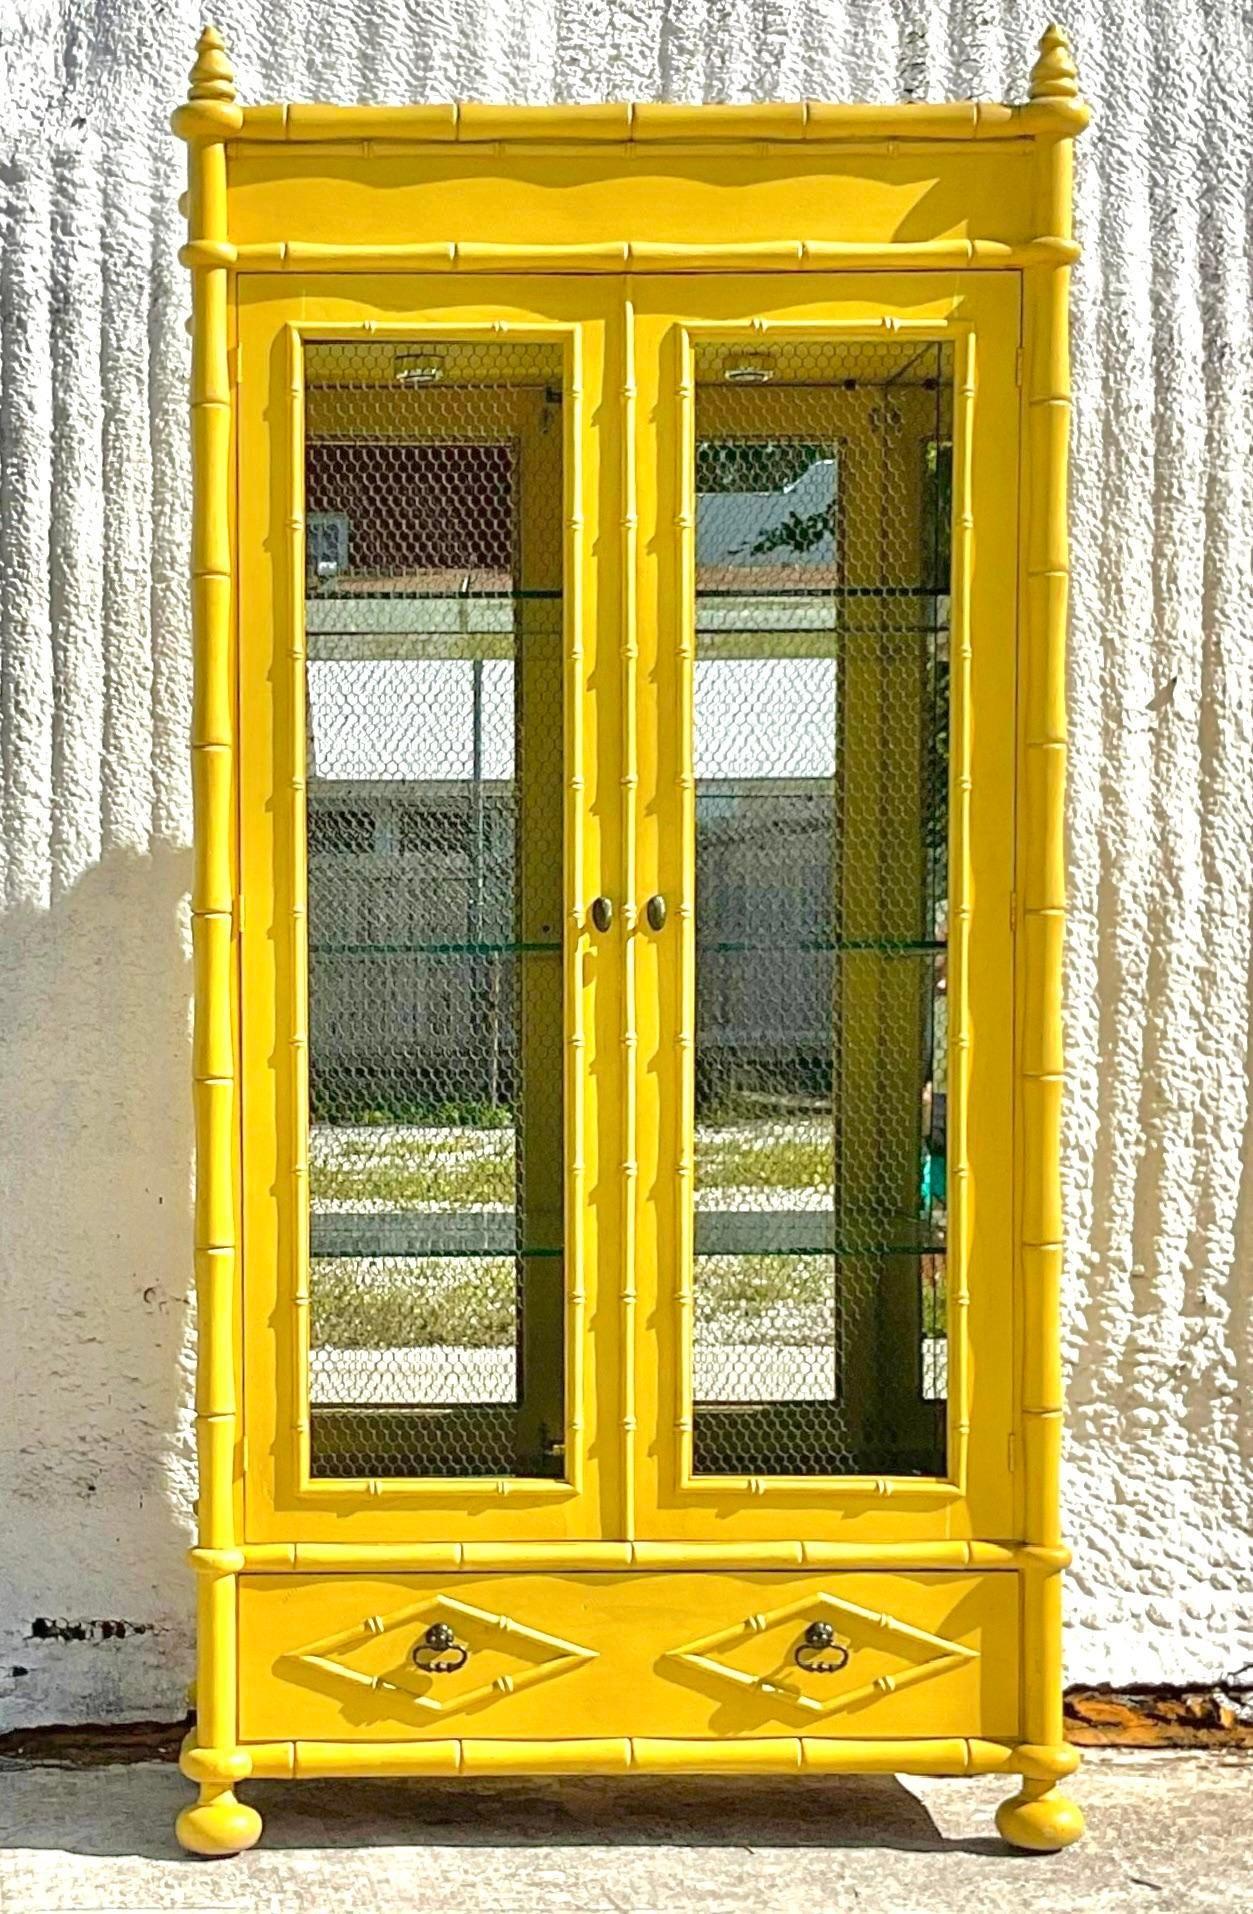 A fantastic vintage Regency mirrored display cabinet. A stunning piece of furniture made by the Youngsville Star Manufacturing group. A custom piece with a fully mirrored interior and glass shelving. Brilliant yellow color with wire inset door